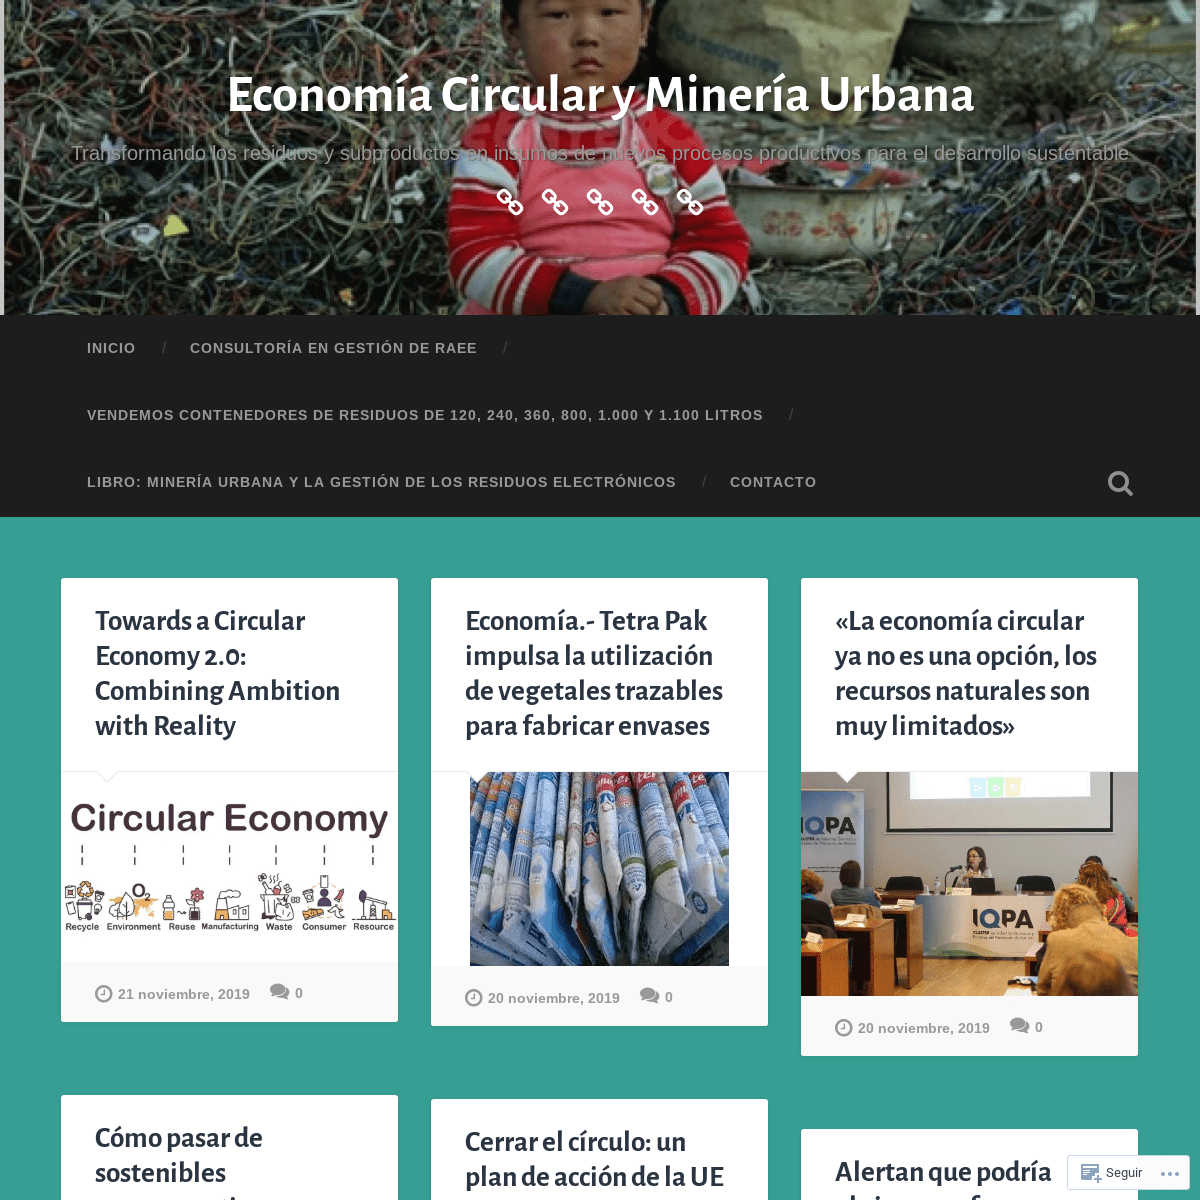 A complete backup of mineriaurbana.org